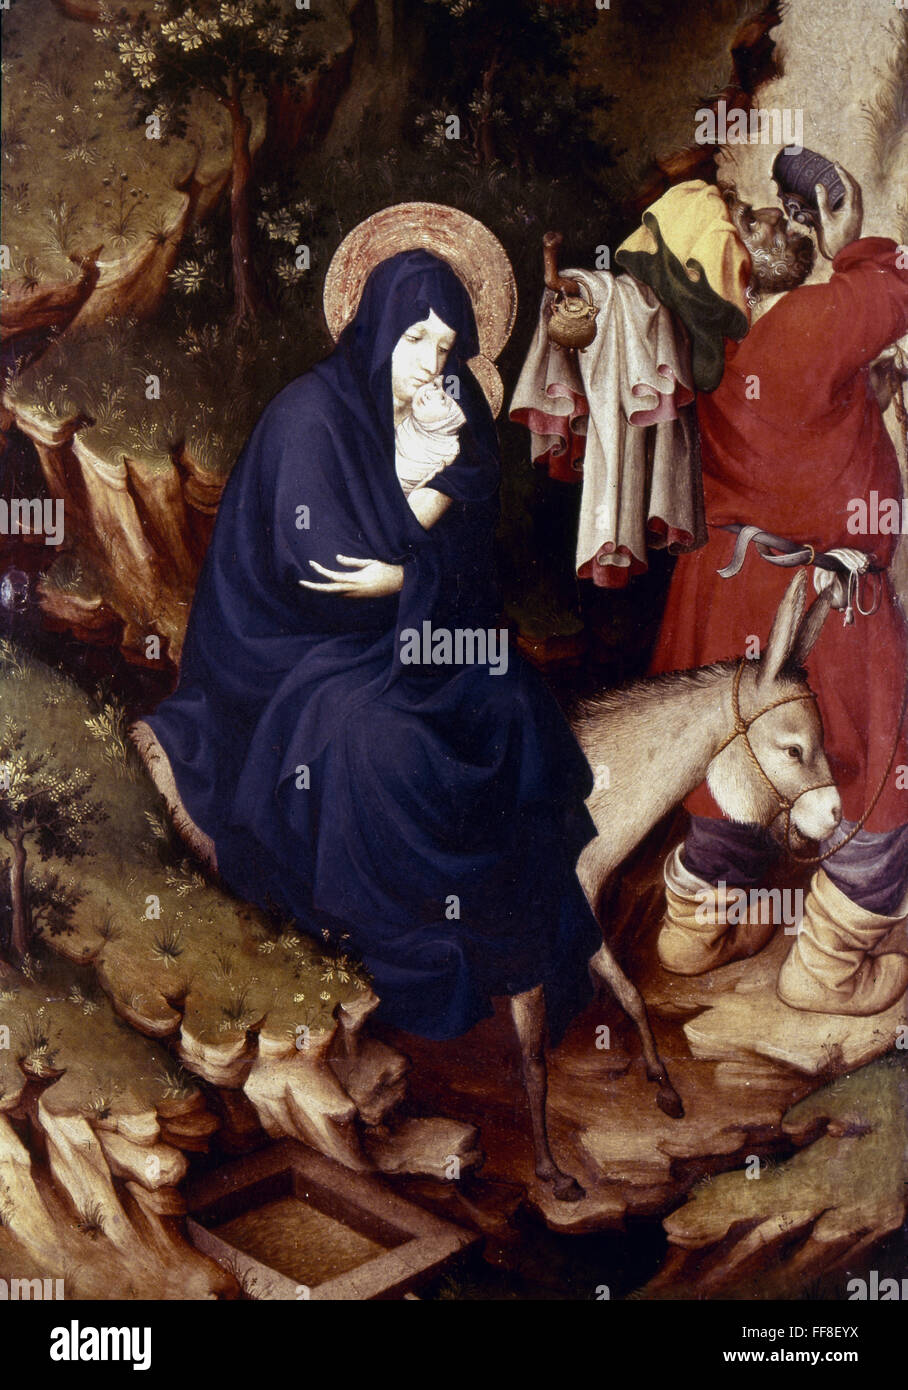 THE FLIGHT INTO EGYPT. /nTempera on wood, detail from the from Altar of Philip the Bold, by Melchior Broederlam, 1399. Stock Photo